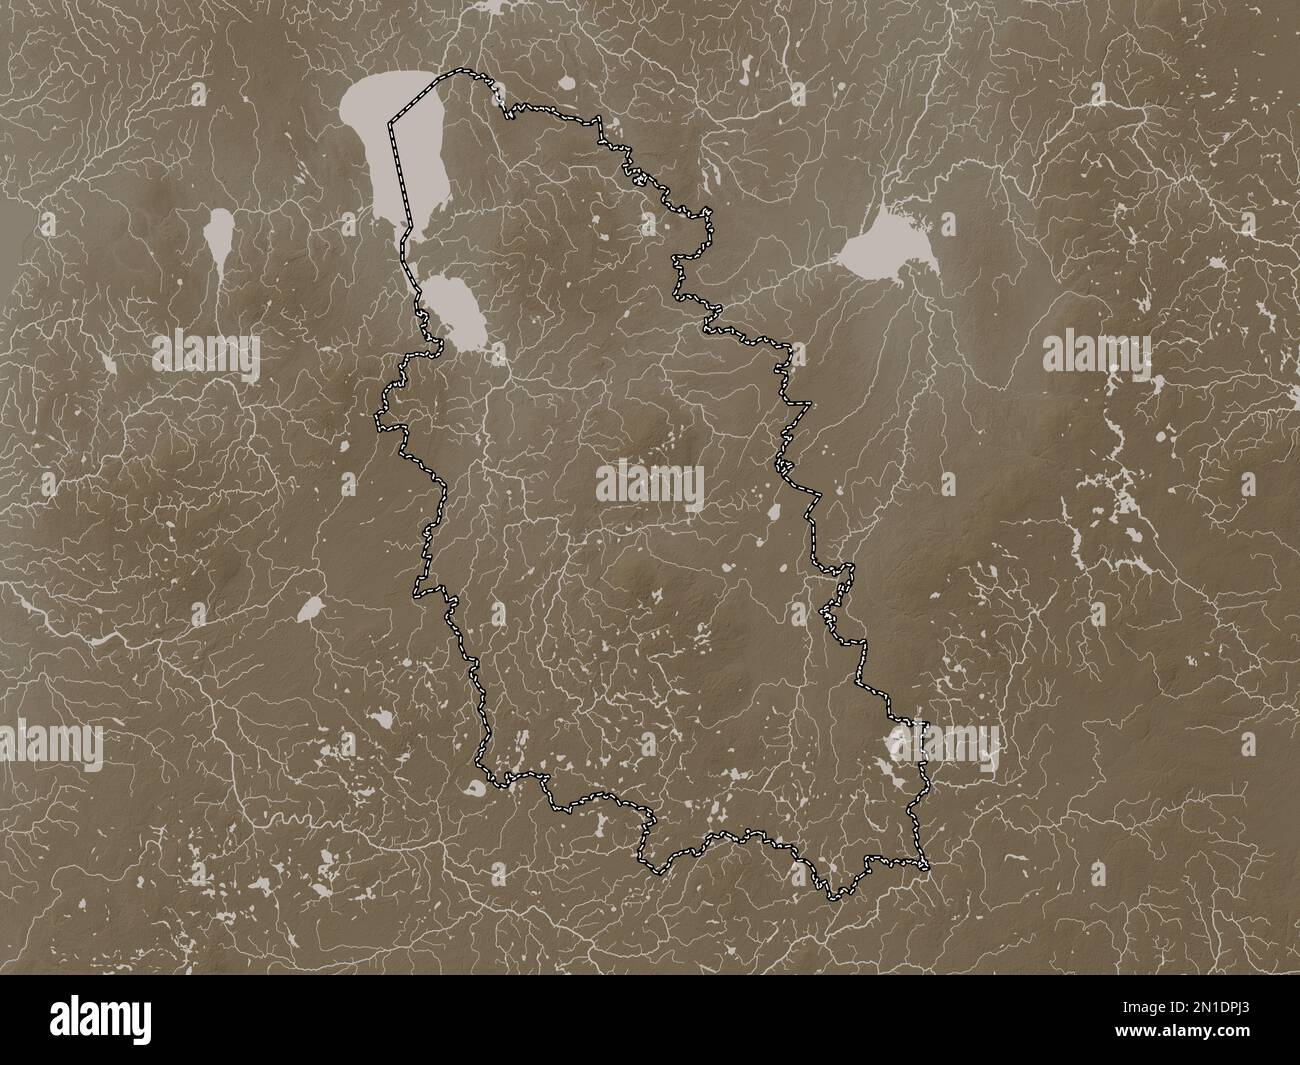 Pskov, region of Russia. Elevation map colored in sepia tones with lakes and rivers Stock Photo